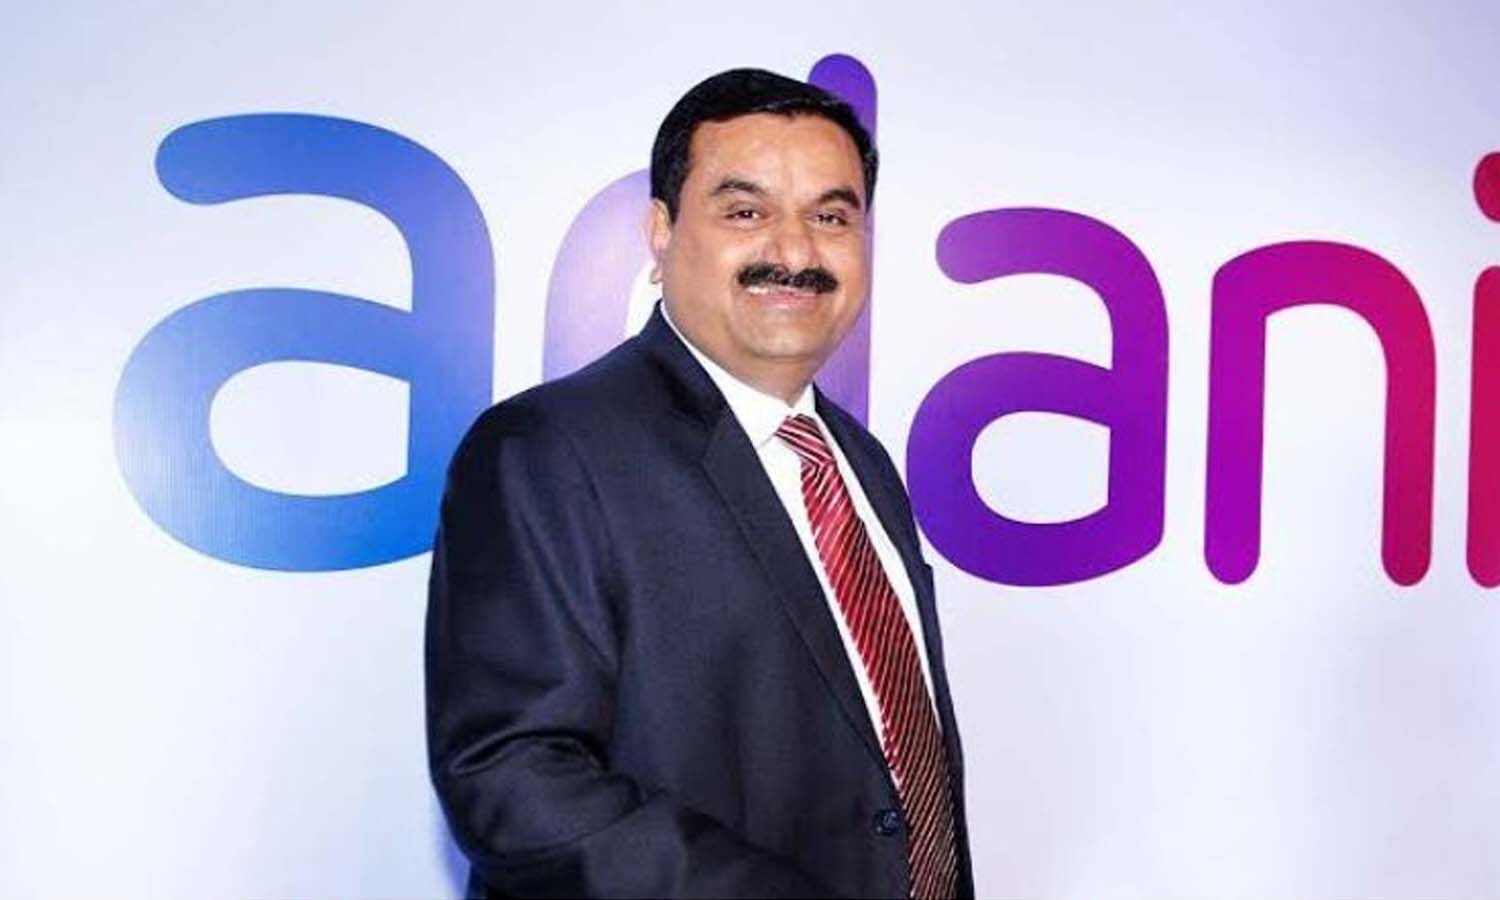 Adani Group: Adani Enterprises and Israel Innovation Authority Sign MoU, Tech Solutions to Evolve